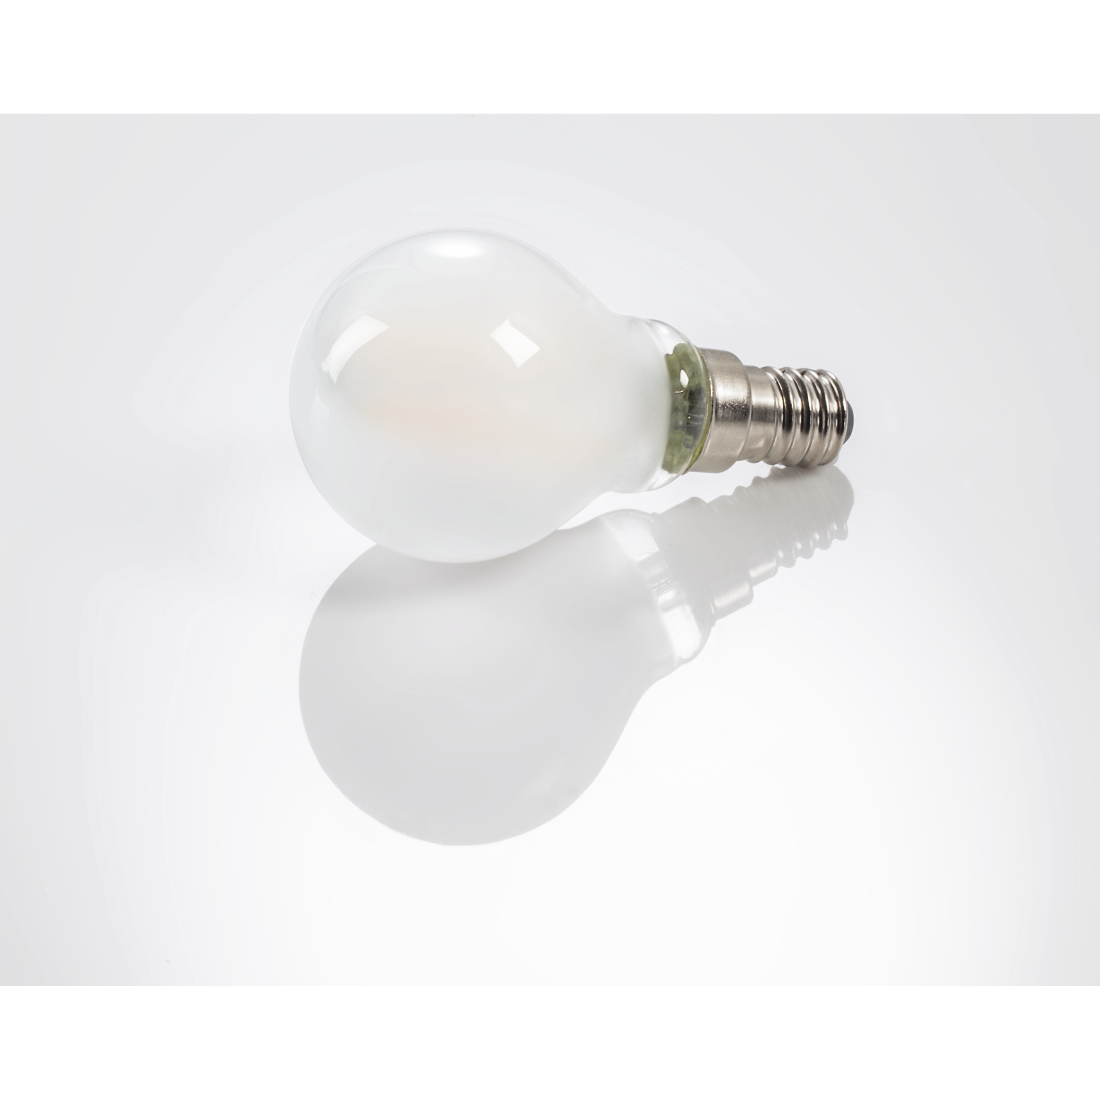 abx3 High-Res Image 3 - Xavax, LED Filament, E14, 250 lm Replaces 25W, Drop Bulb, warm white